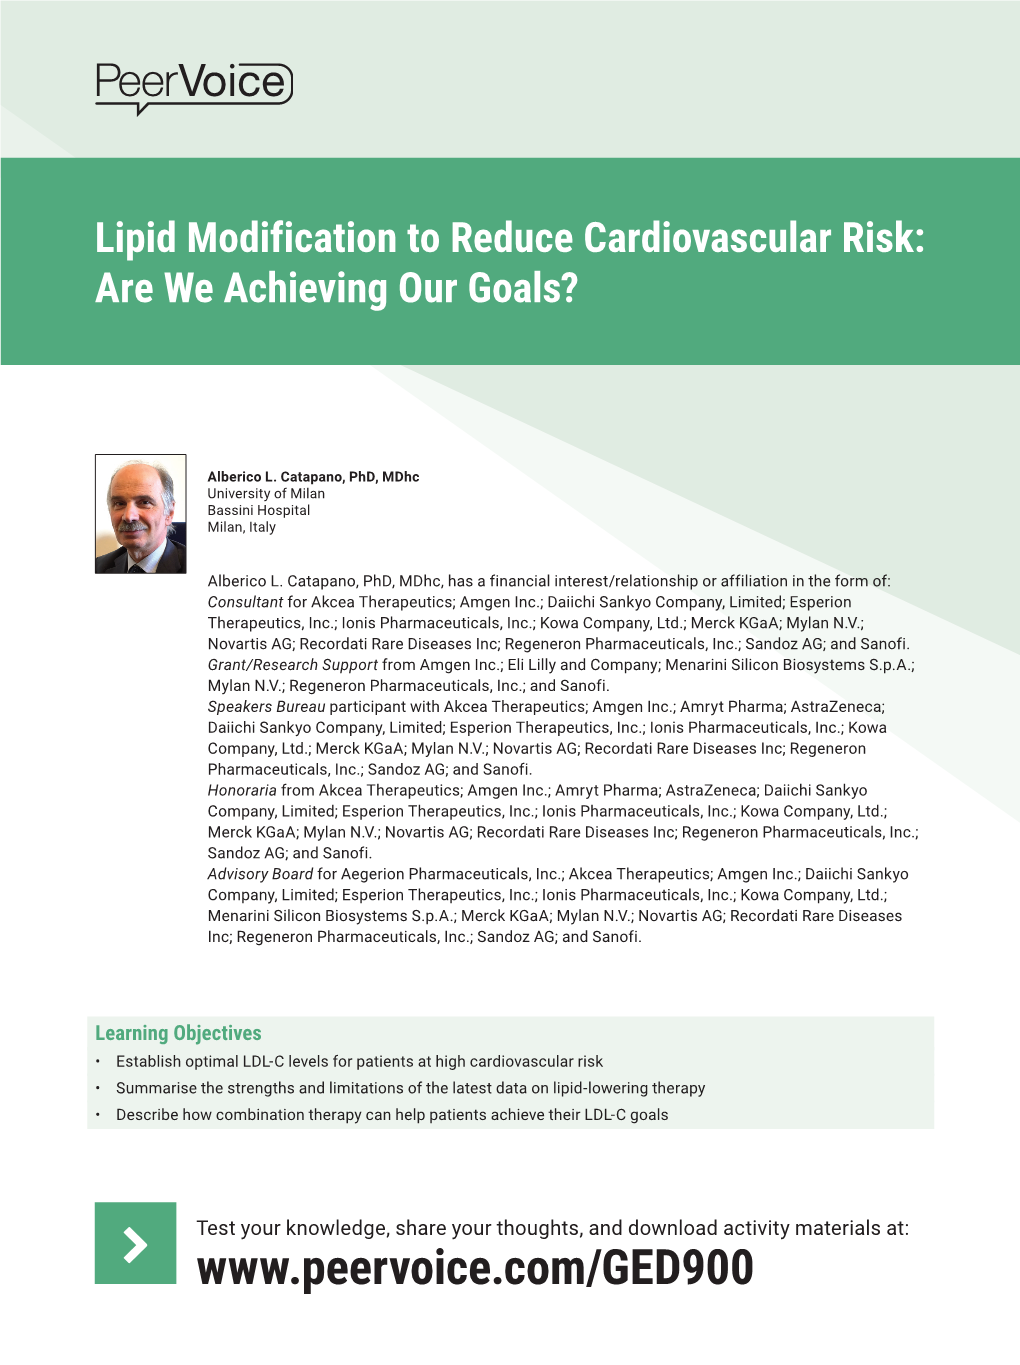 Lipid Modification to Reduce Cardiovascular Risk: Are We Achieving Our Goals?